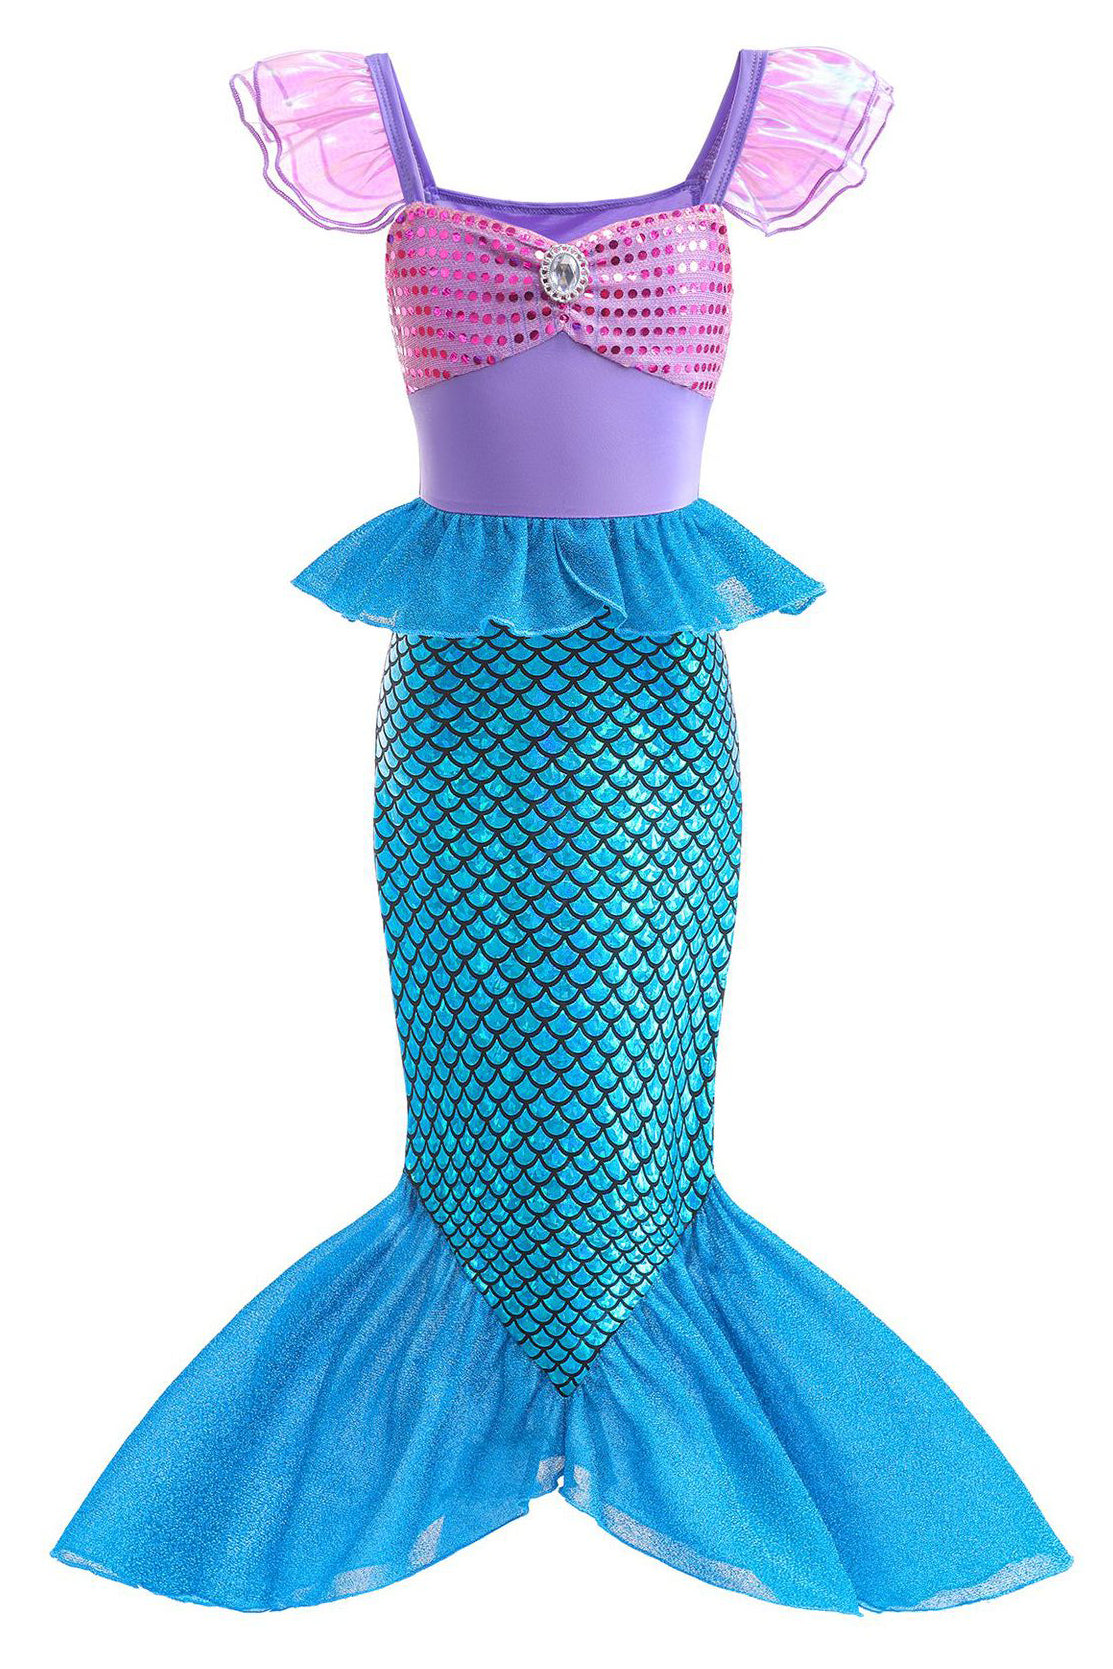 Girls' Little Mermaid Costume and Wig for Halloween